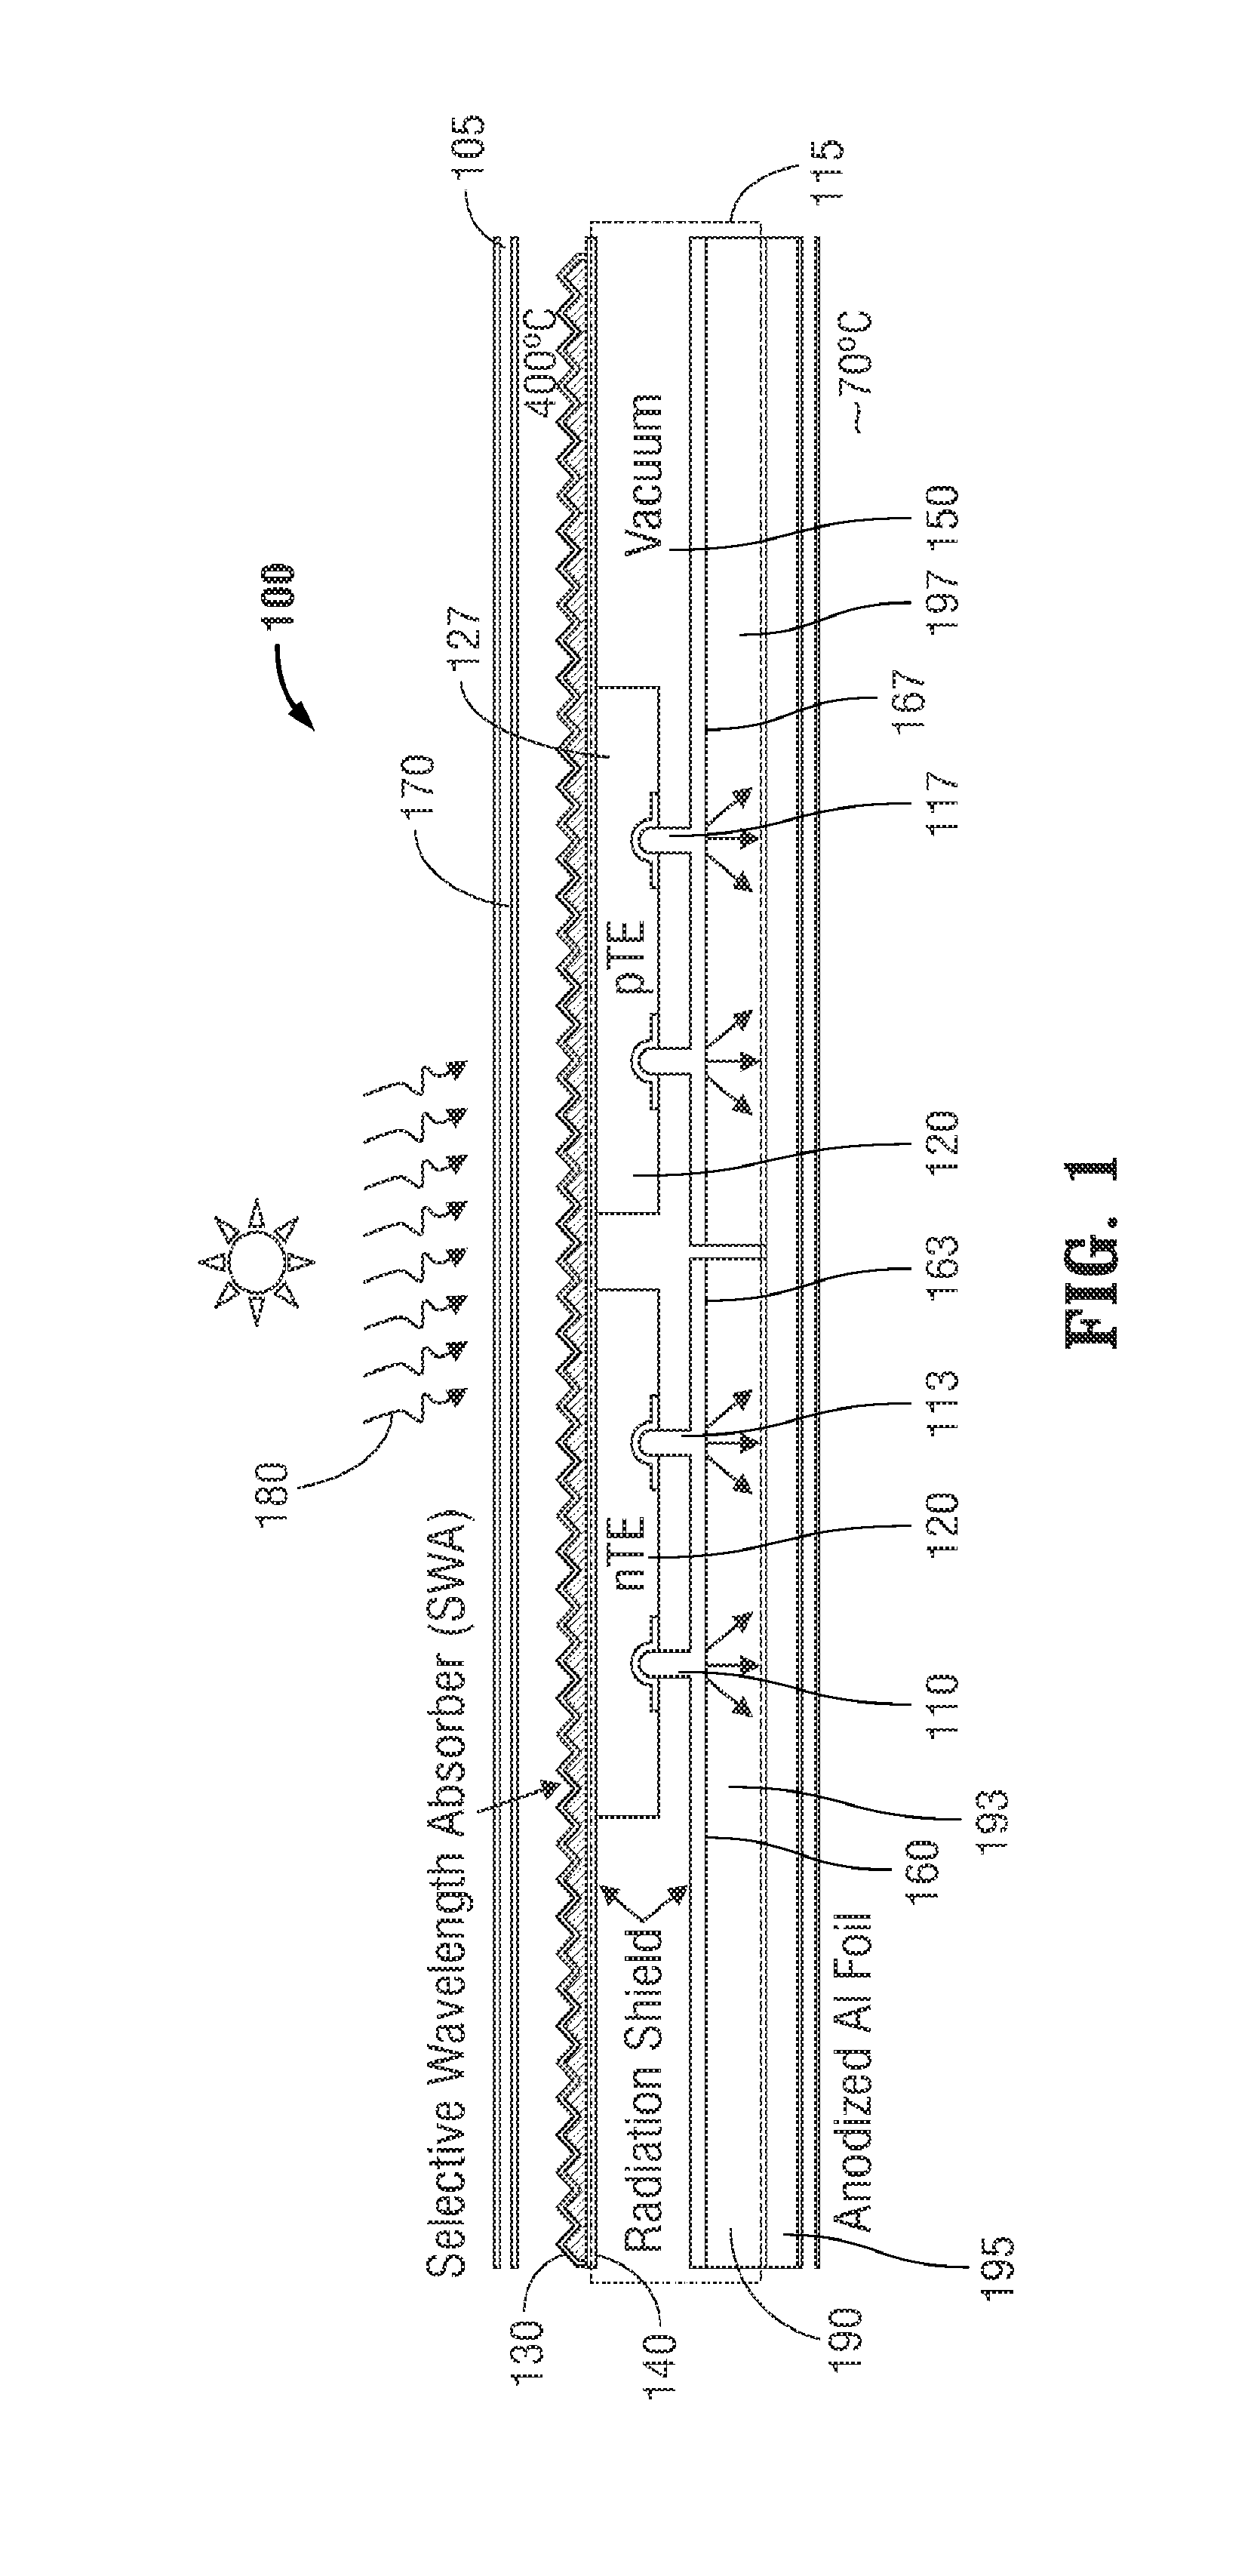 Solar thermoelectric generator with integrated selective wavelength absorber